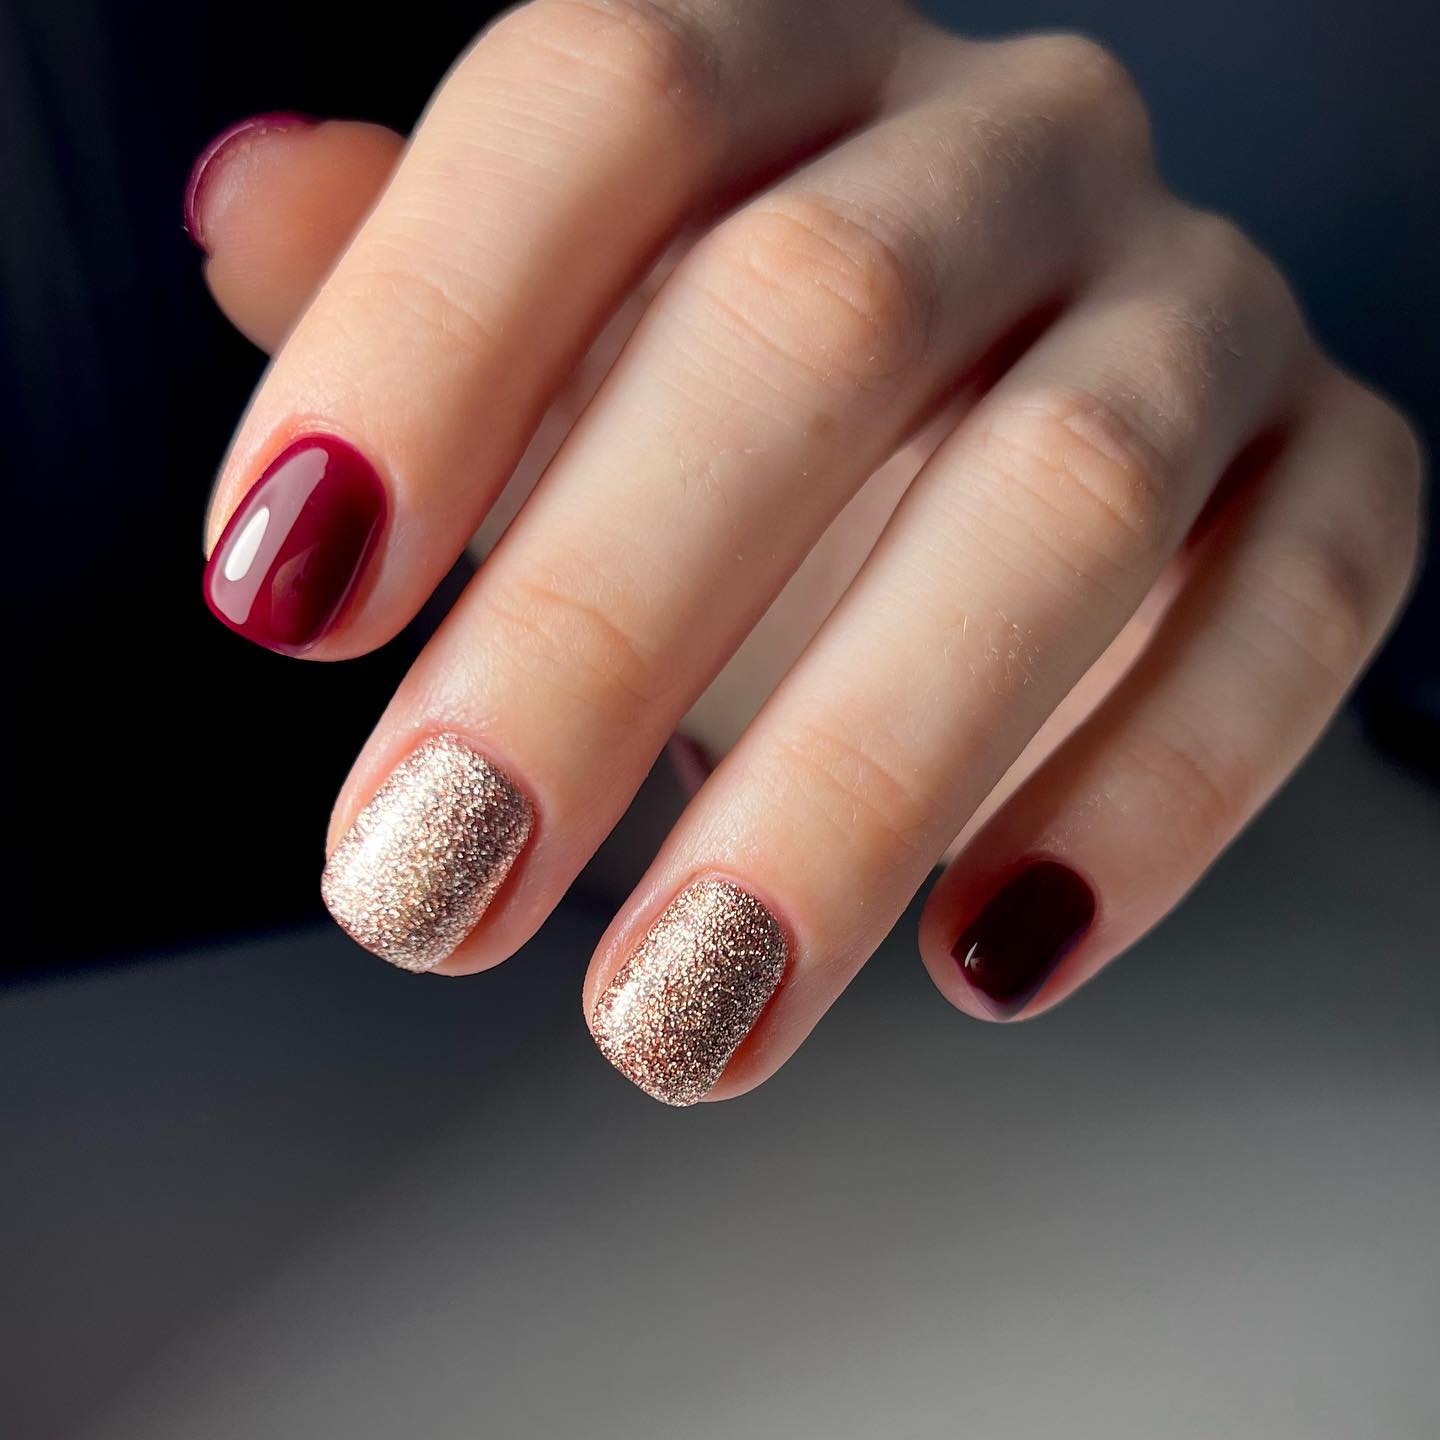 50+ Sultry and Stylish Burgundy Nail Designs